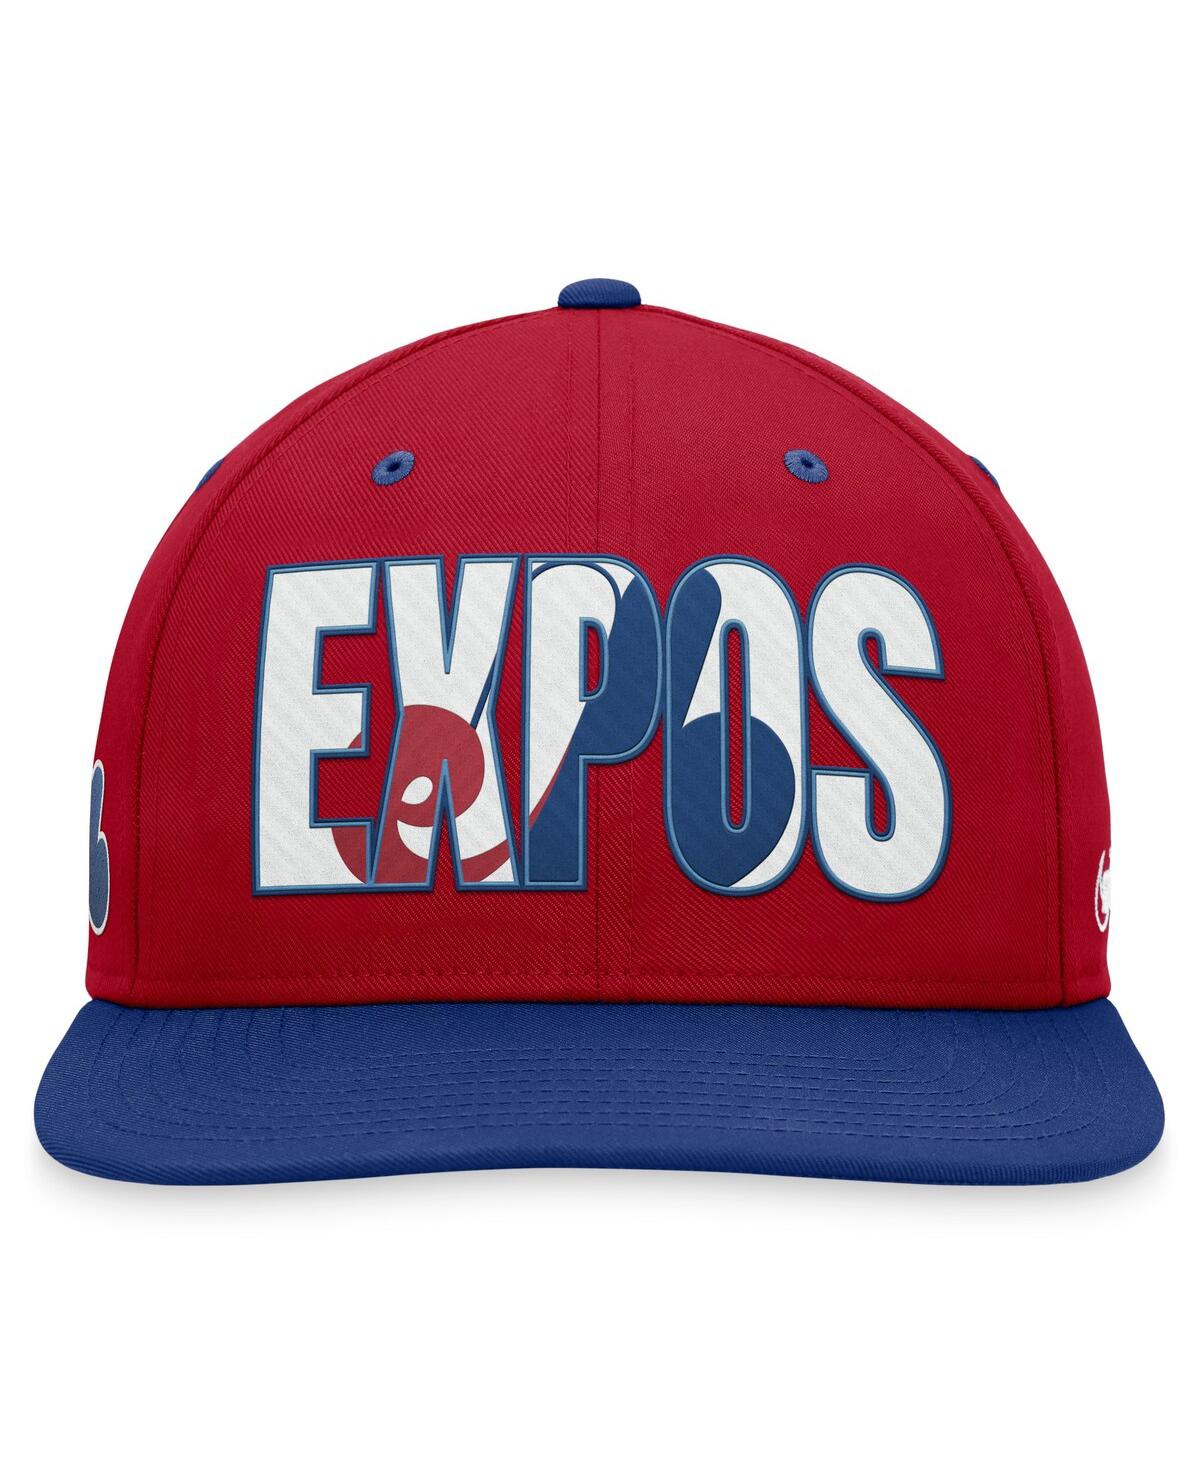 Shop Nike Men's  Red Montreal Expos Cooperstown Collection Pro Snapback Hat